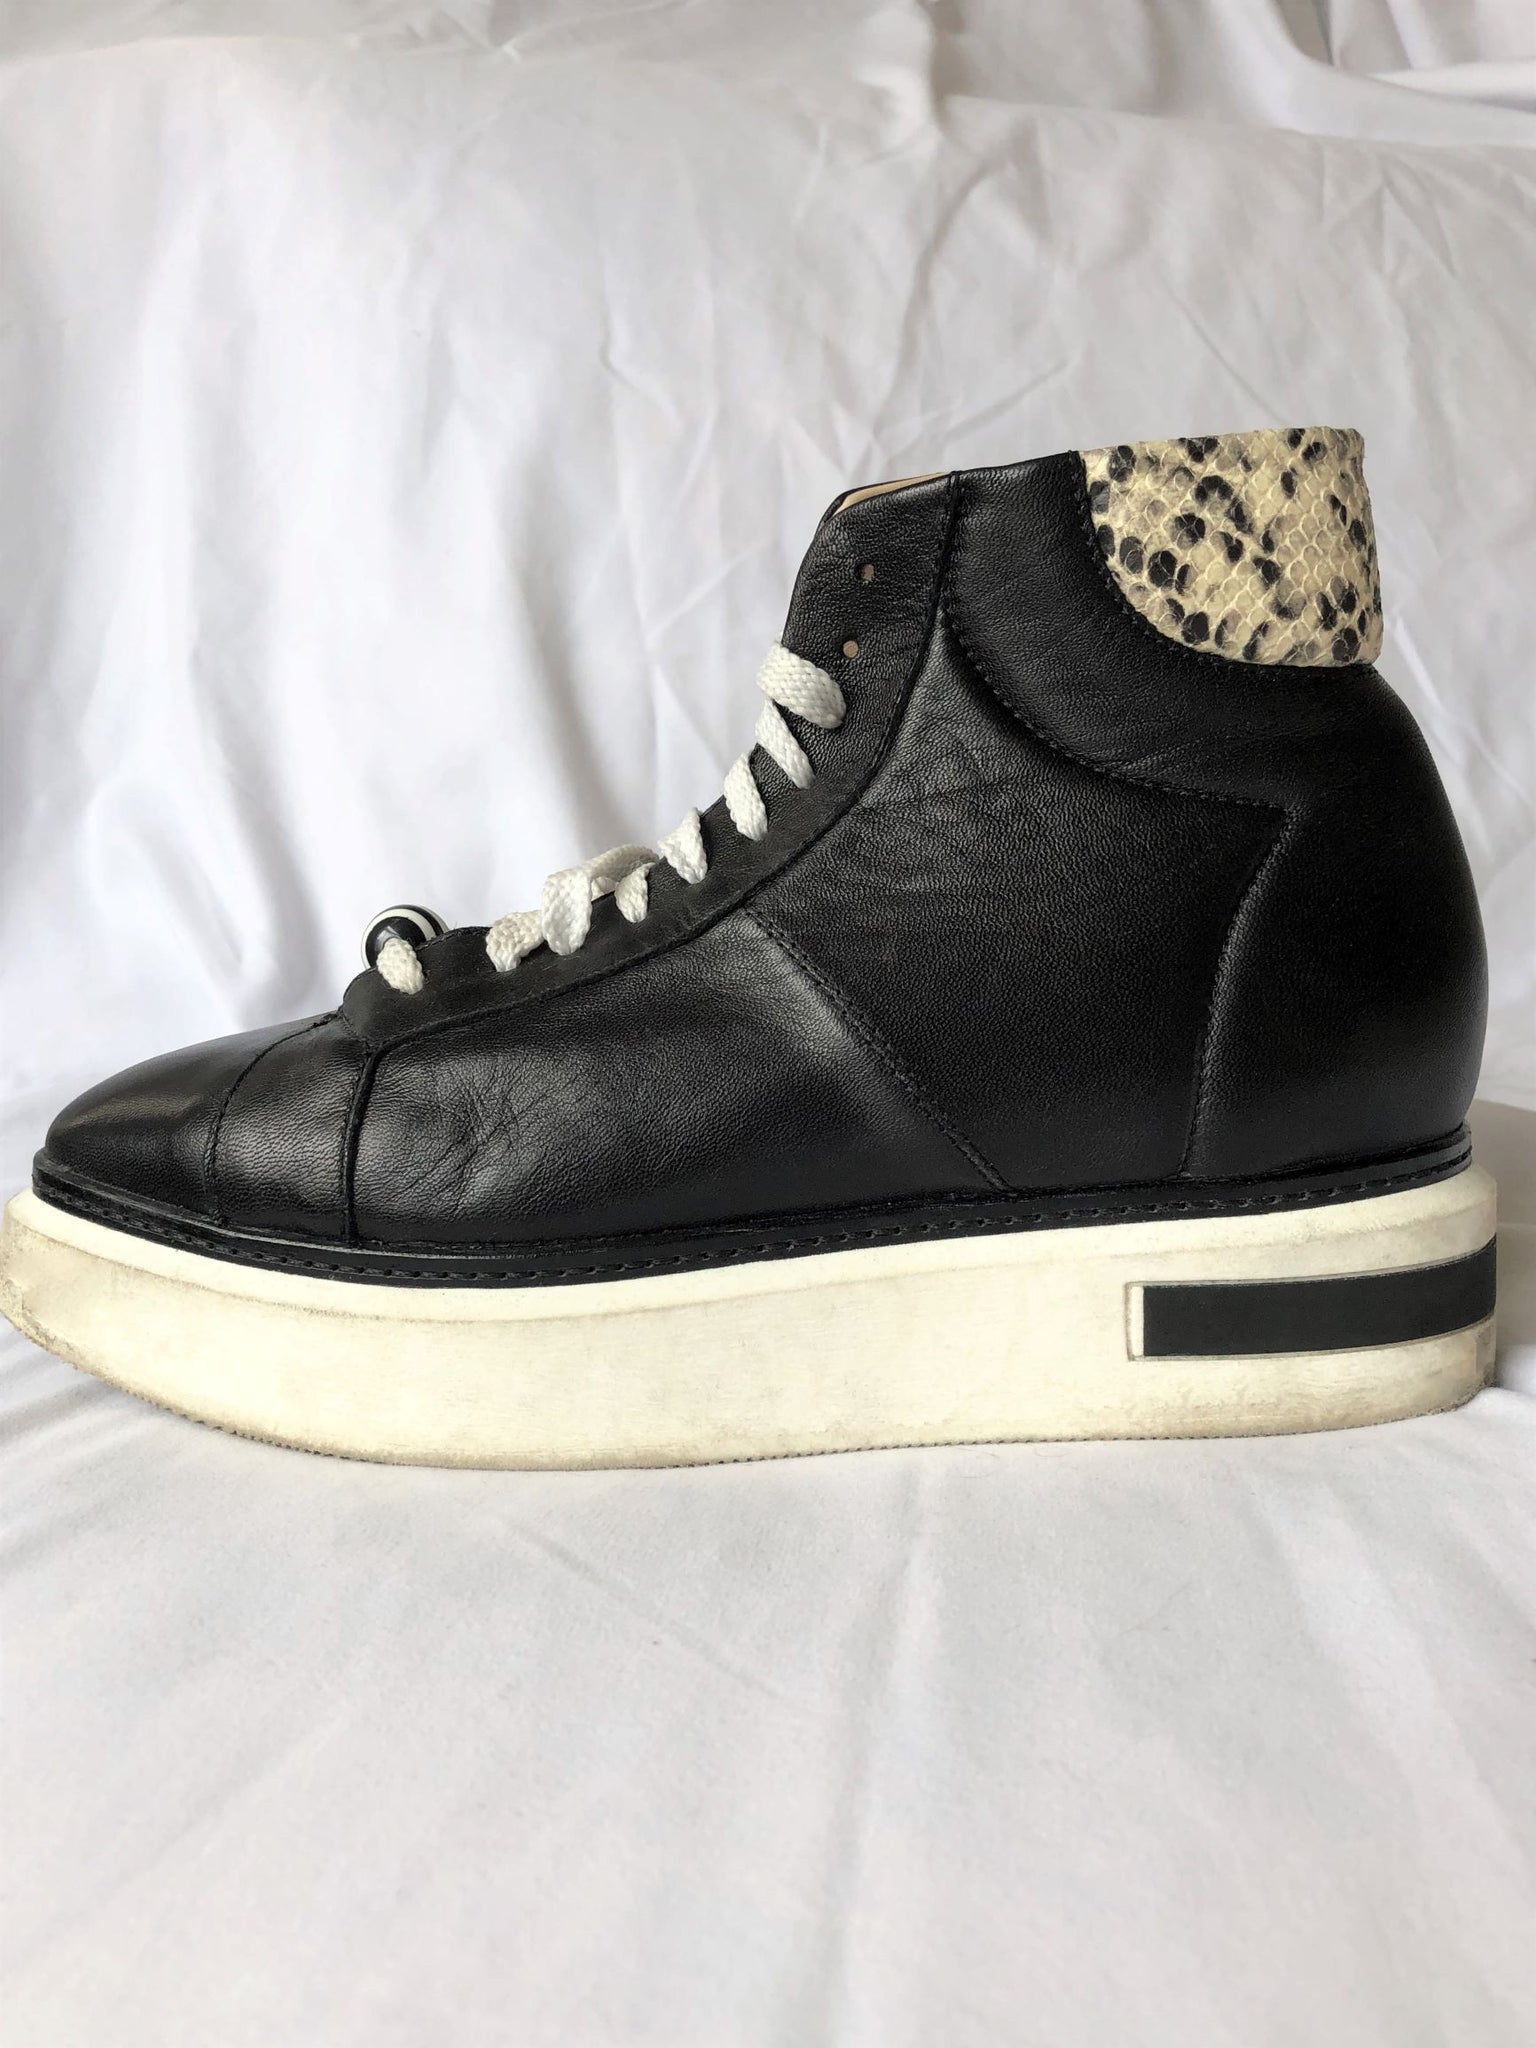 Oxitaly Size 8.5 Italian Black Leather Platform Sneakers - CLEARANCE